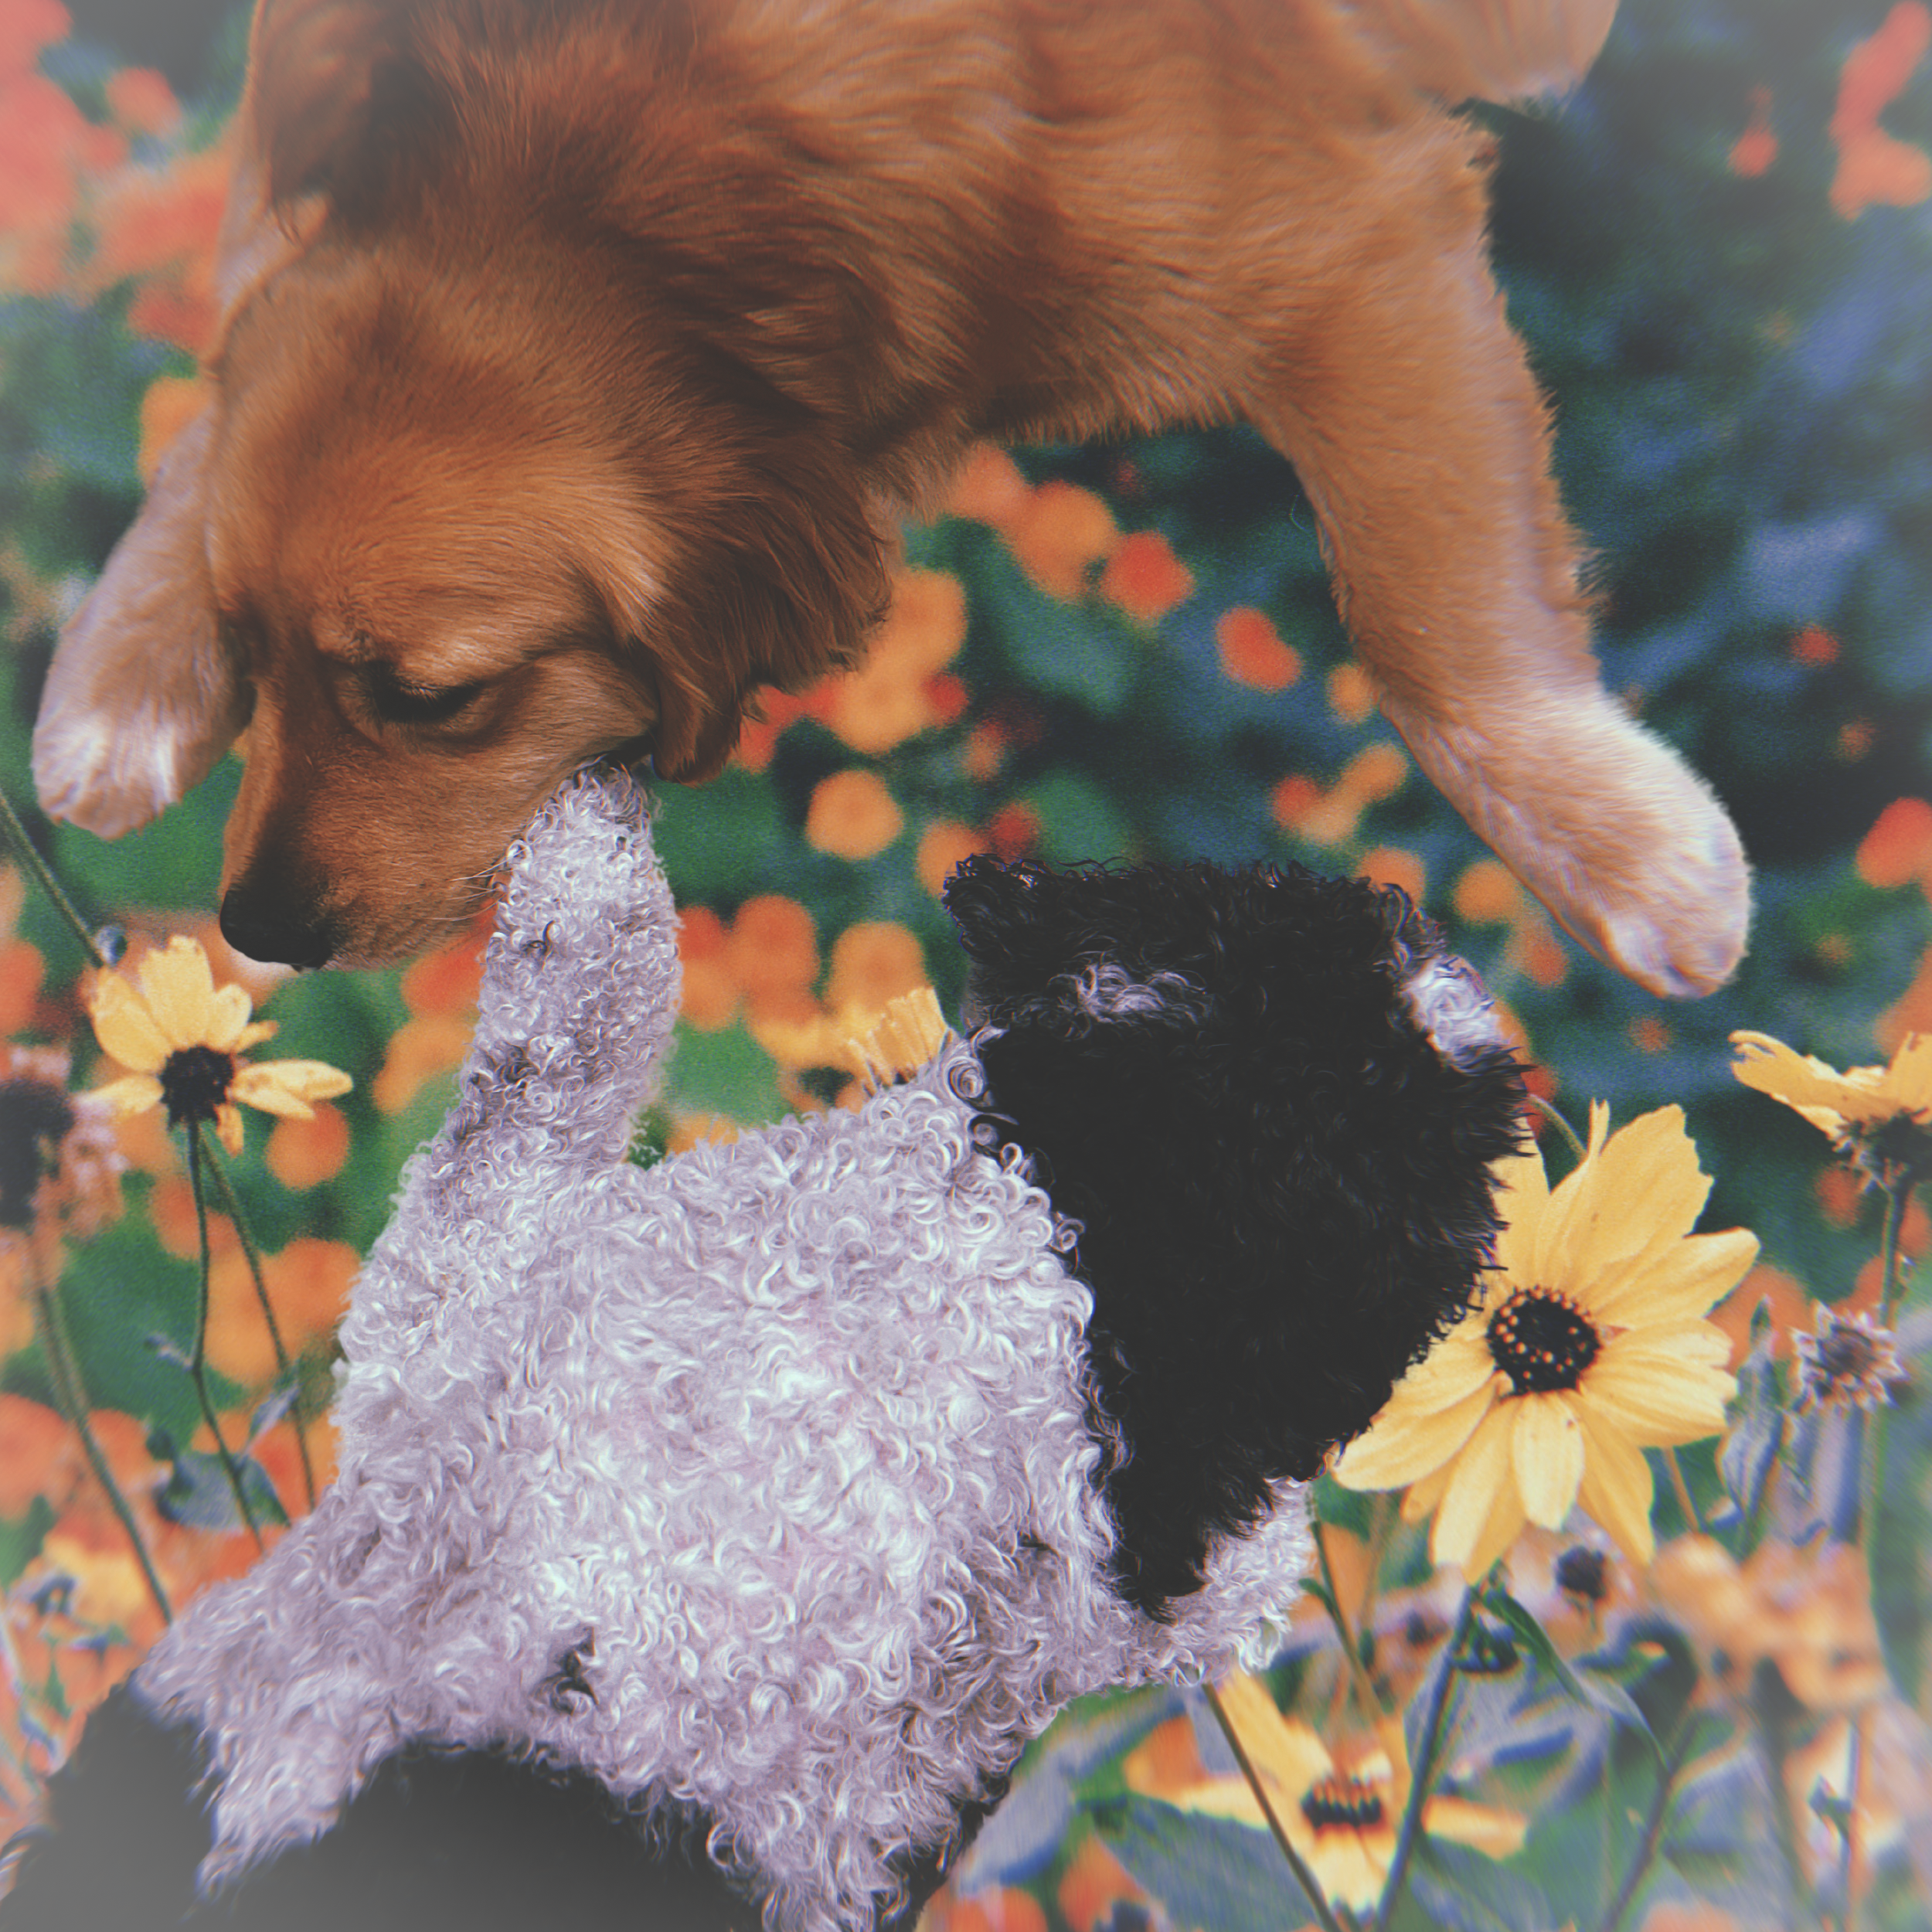 An adolescent female Golden Retriever and Therapy Dog rests her head by a senior black and white Cockapoo's paw to comfort her. Behind them are Black Eyed Susans.